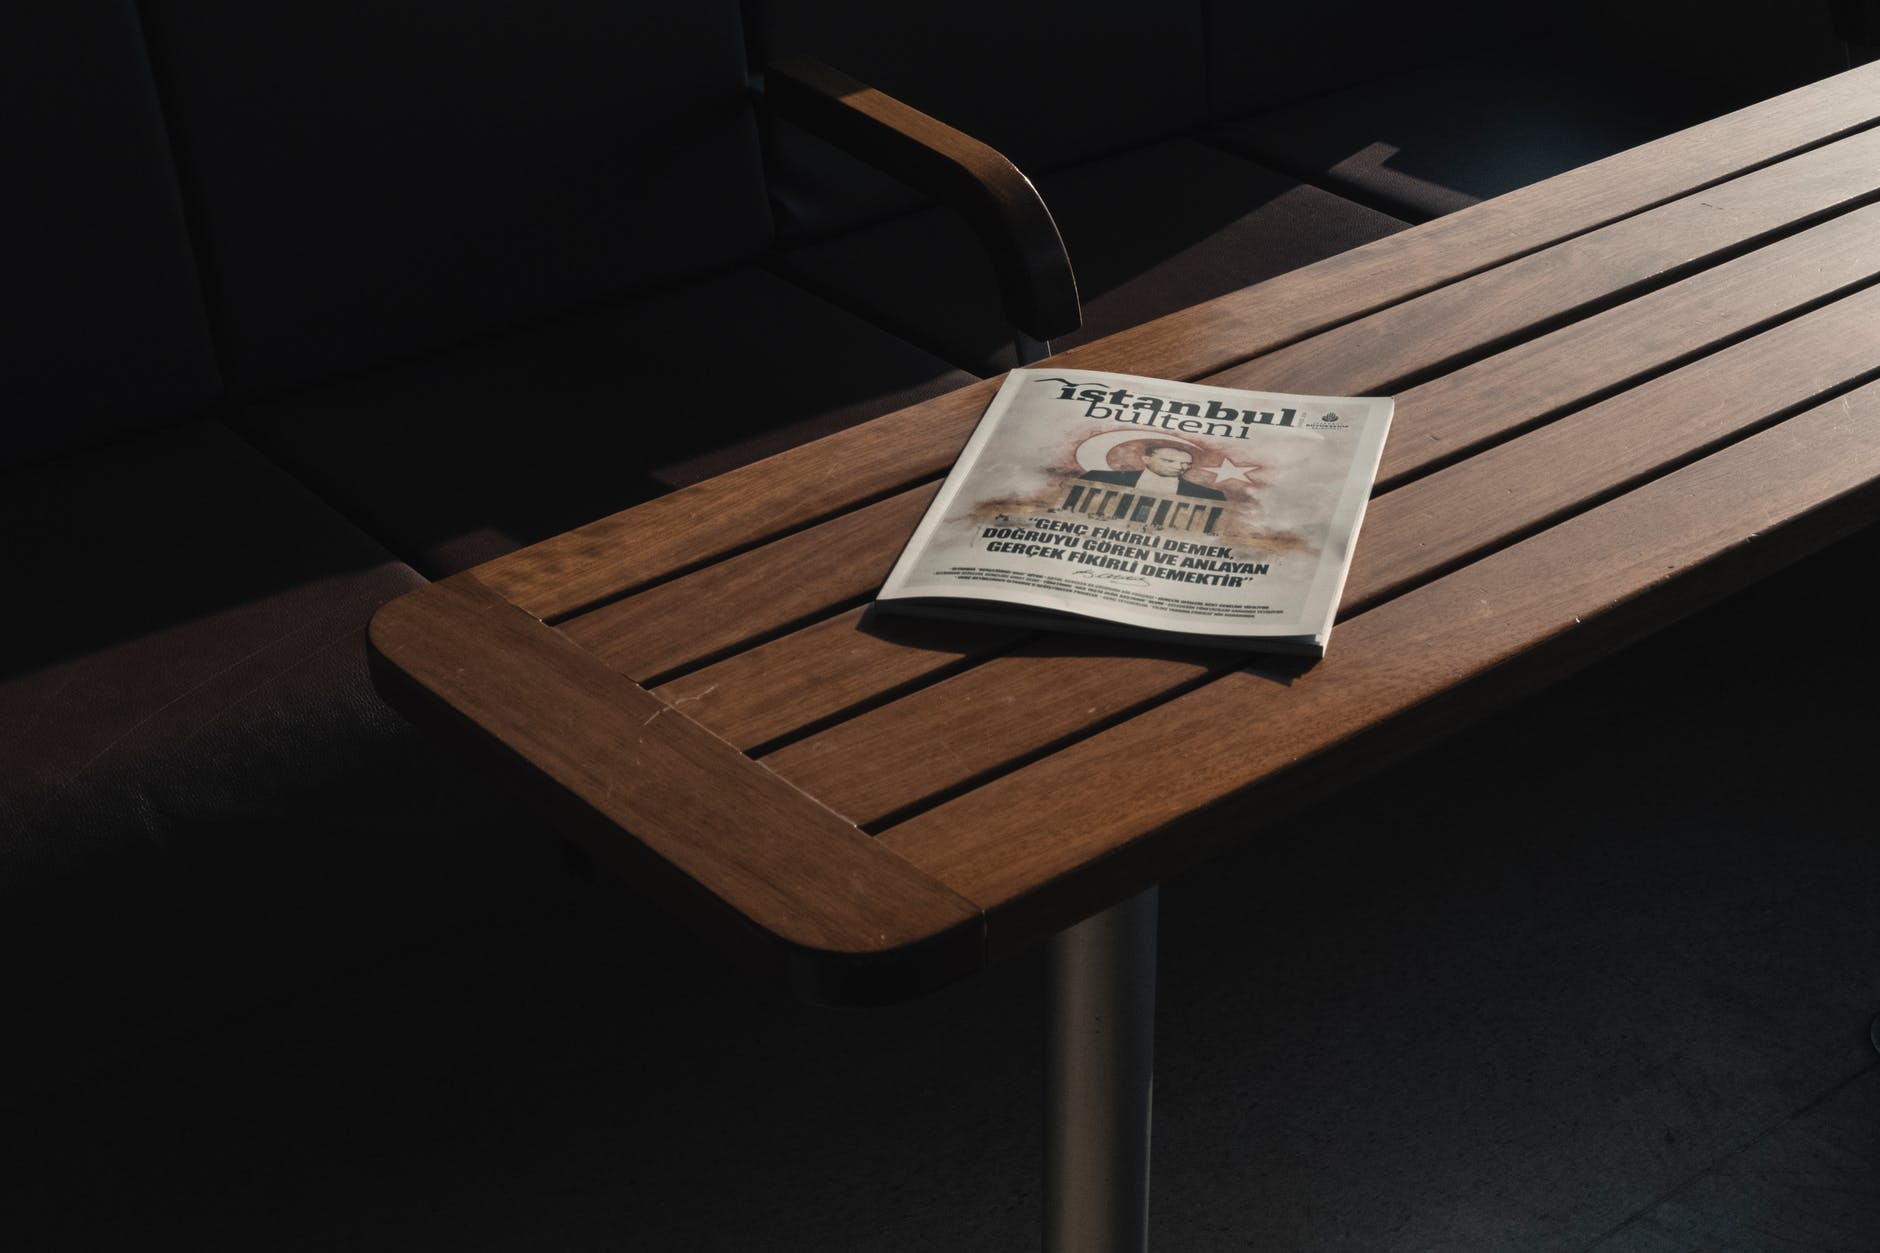 turkish magazine placed on wooden table near chairs